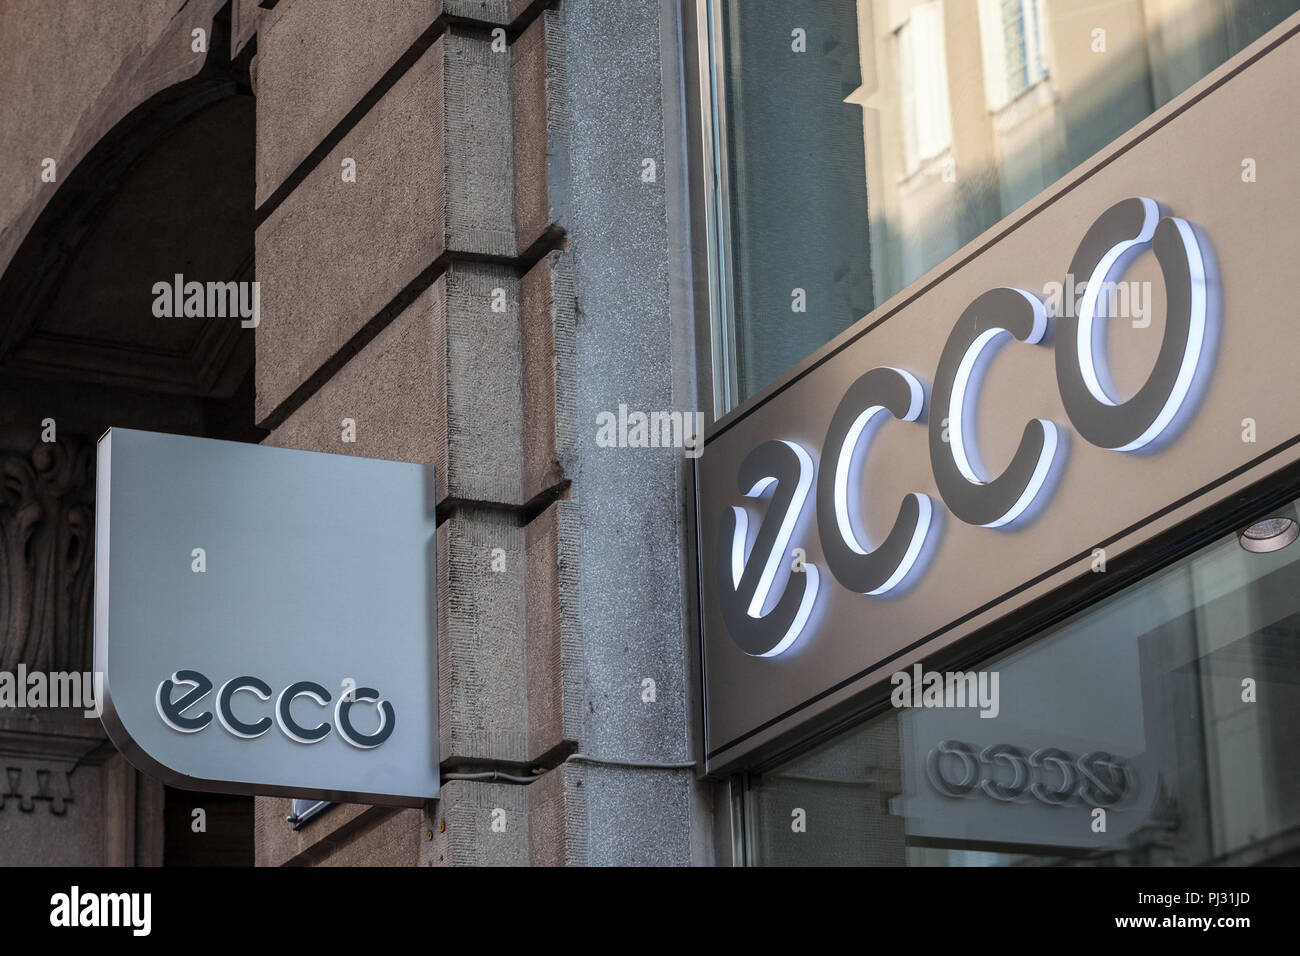 Ecco sign stock photography and images - Alamy